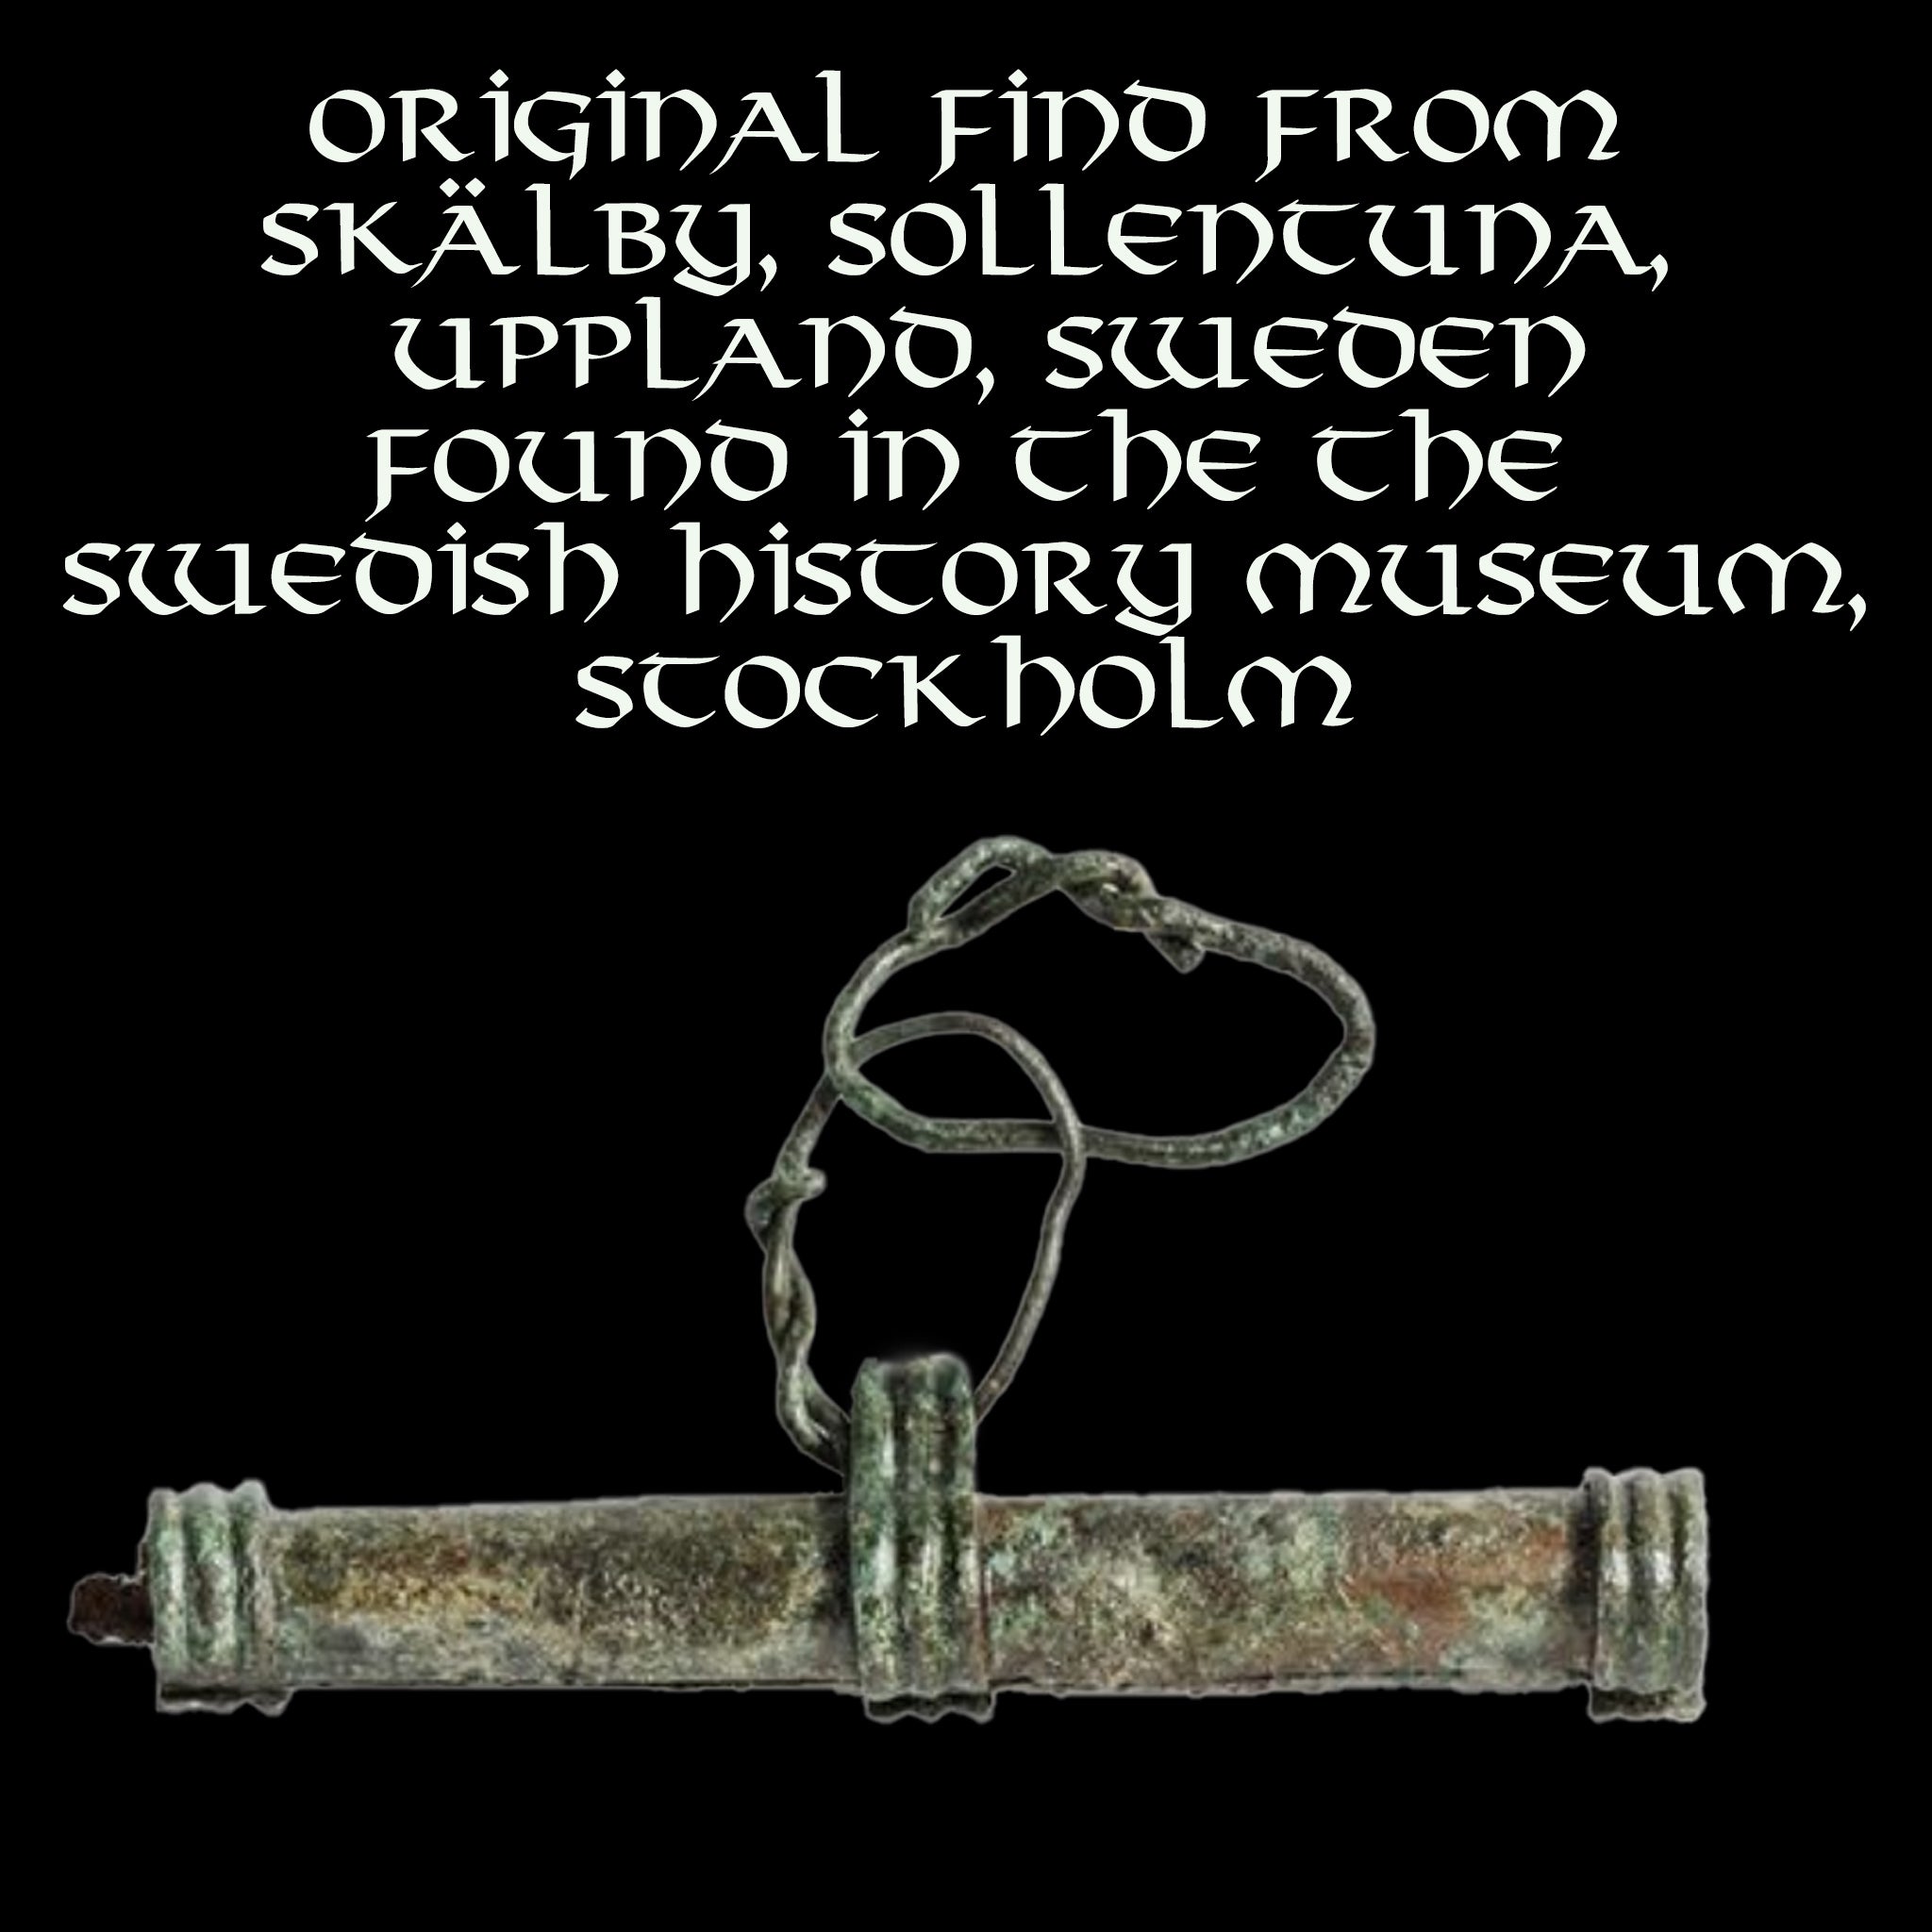 Bronze Replica Viking Needle Case from Sweden - Original from the Museum of Sweden in Stockholm